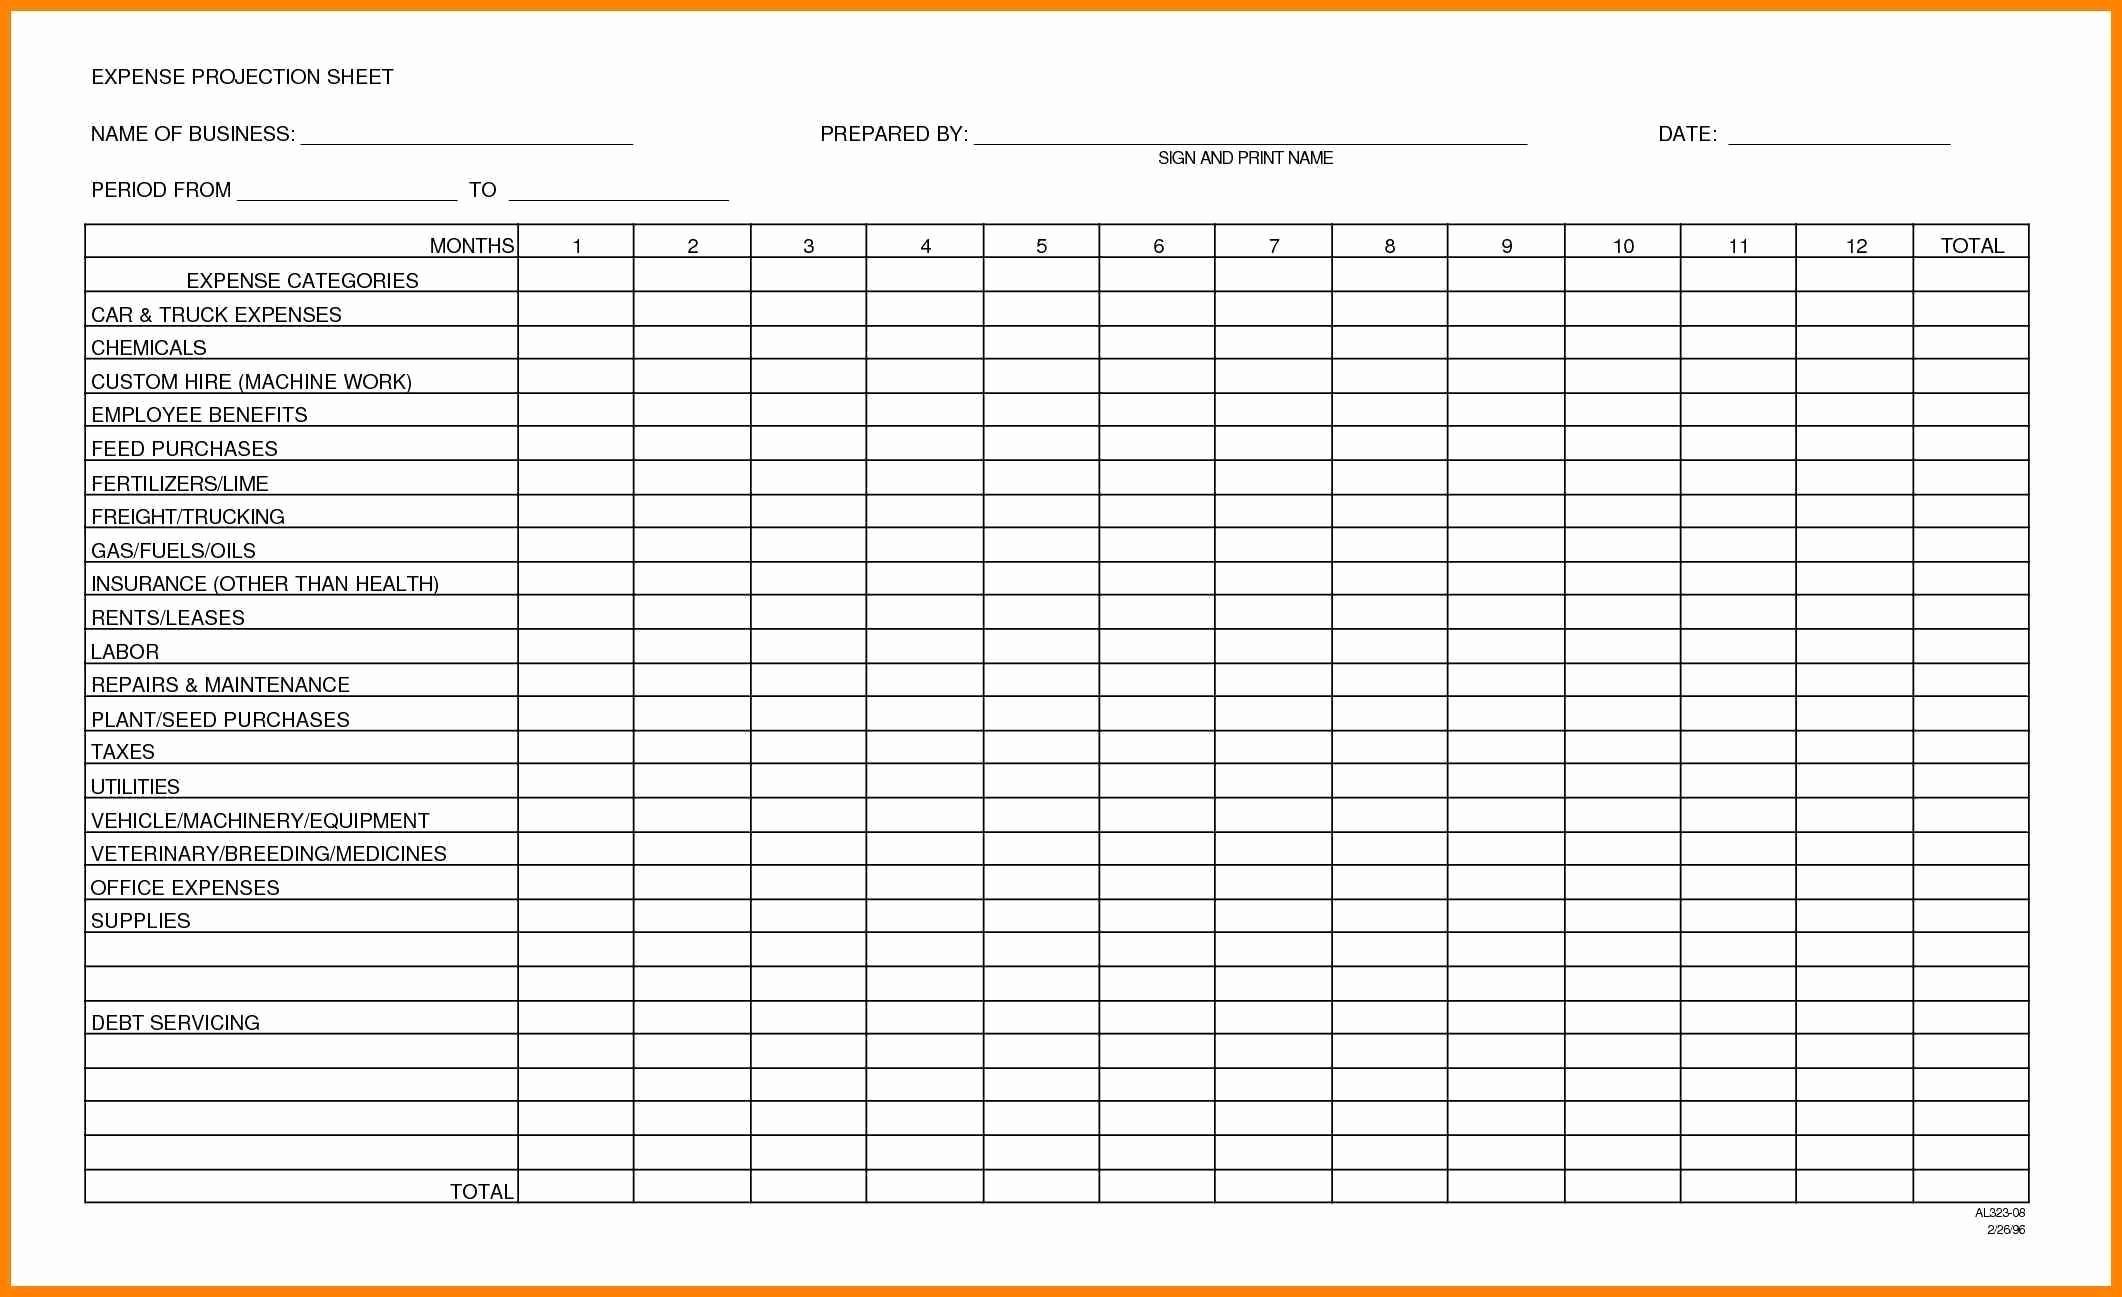 Tax Expense Sheet Tier Crewpulse Co Document Business Spreadsheet For Taxes